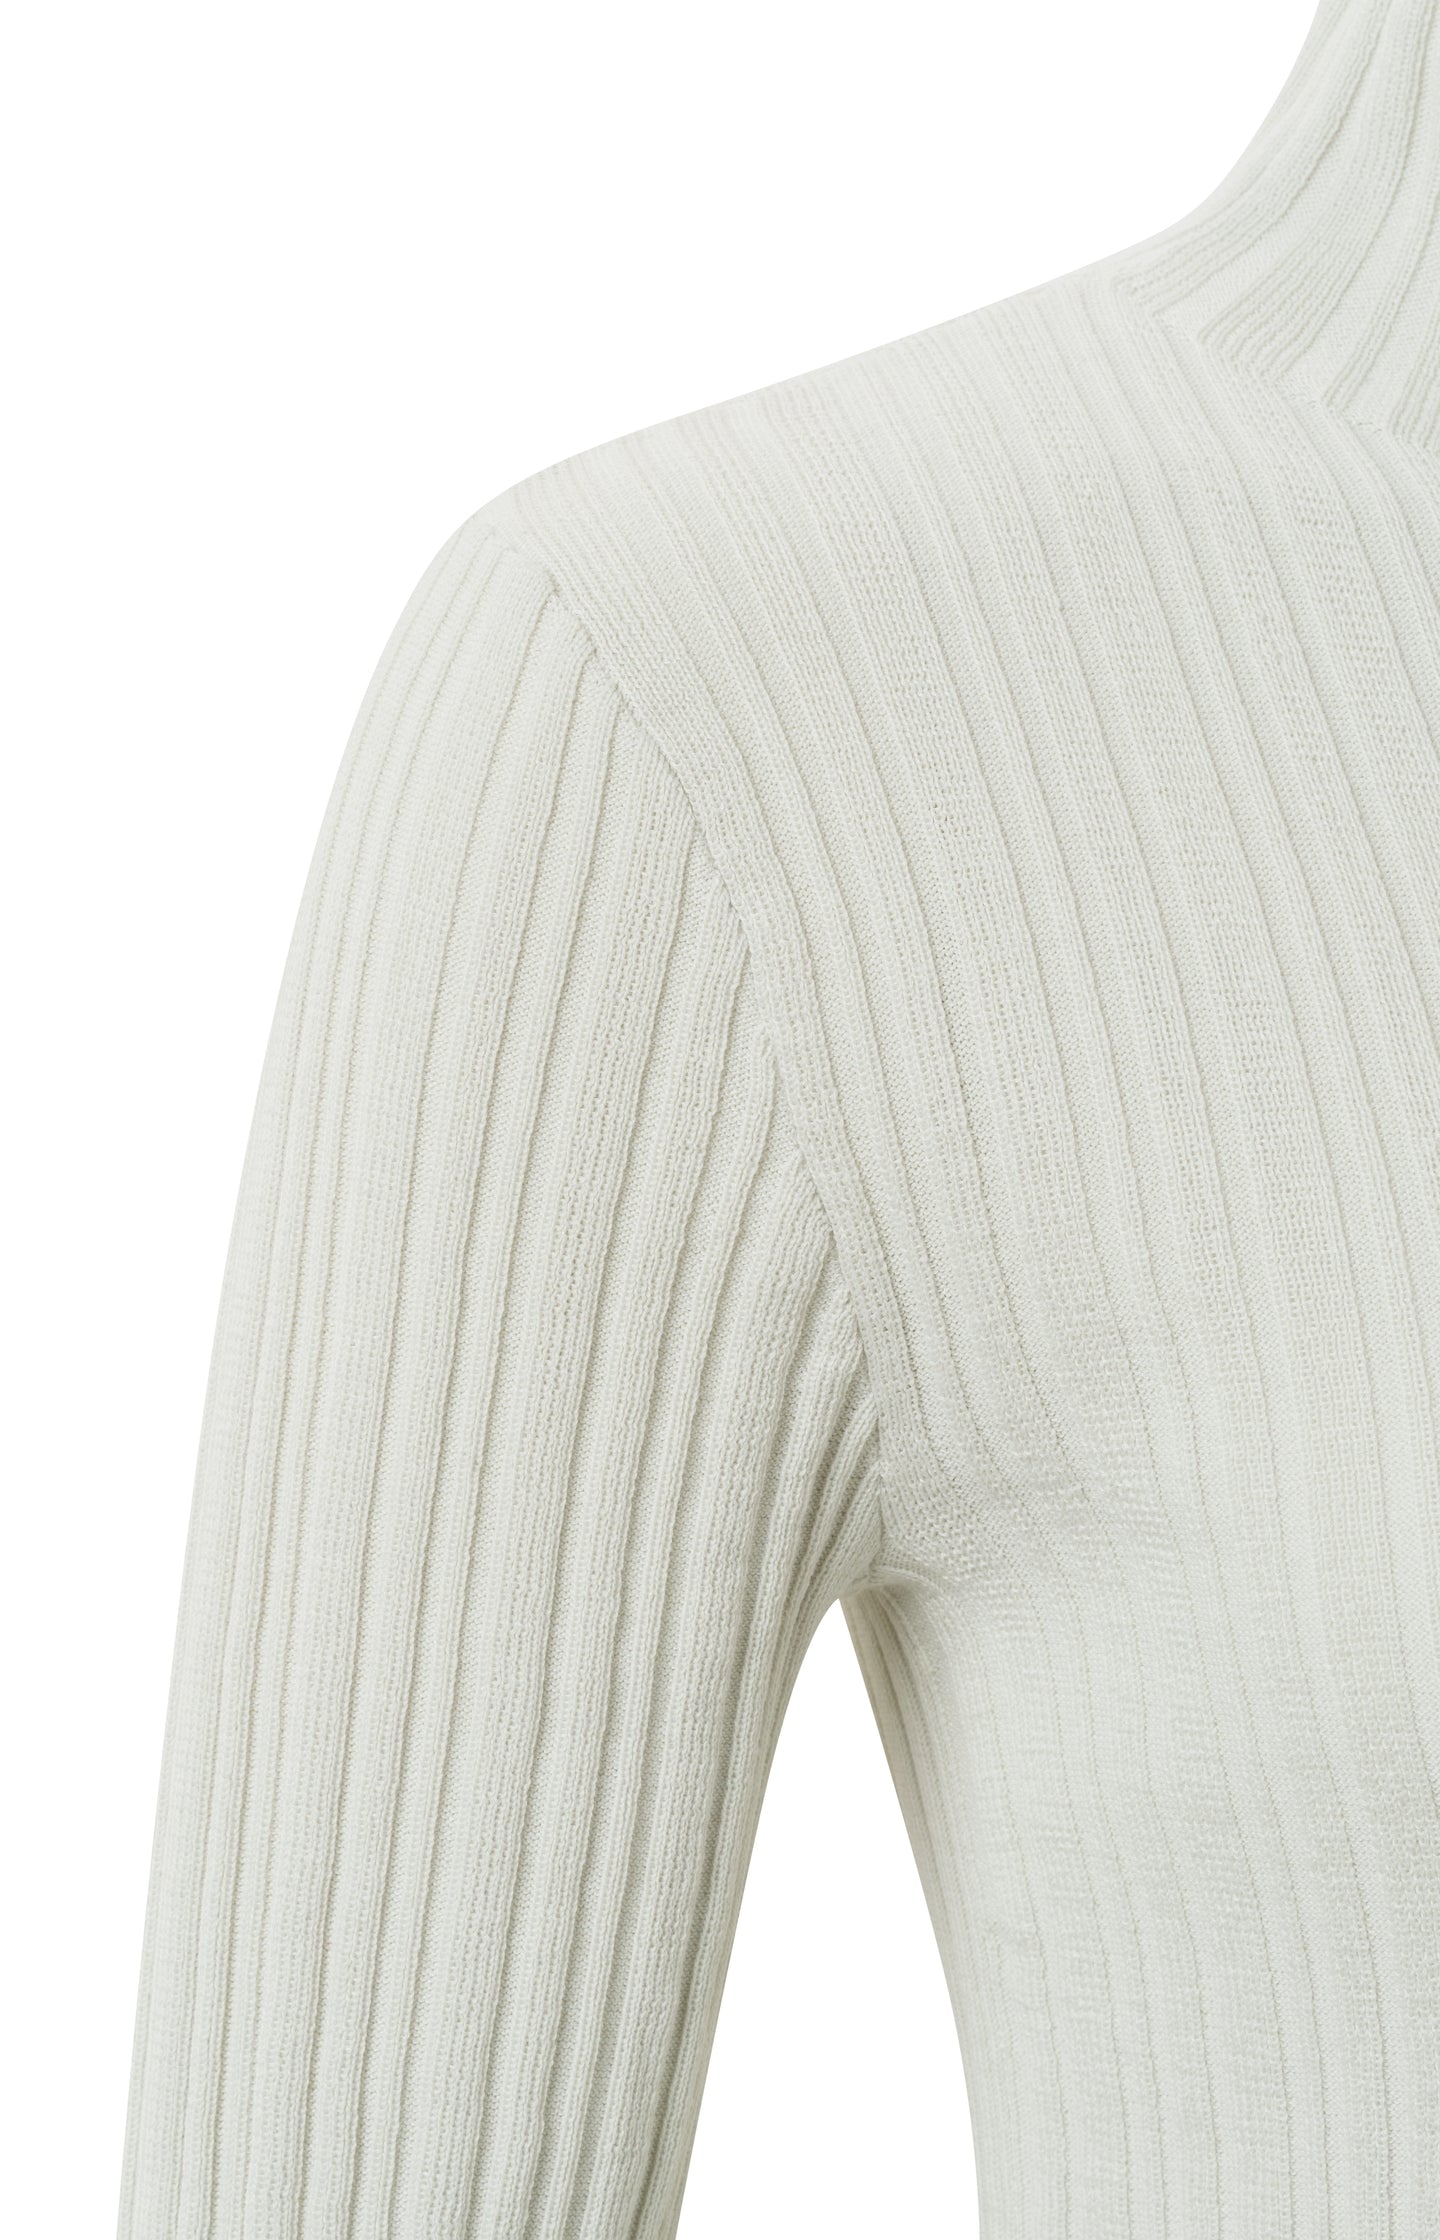 Ribbed sweater with high neck, long sleeves and zipper